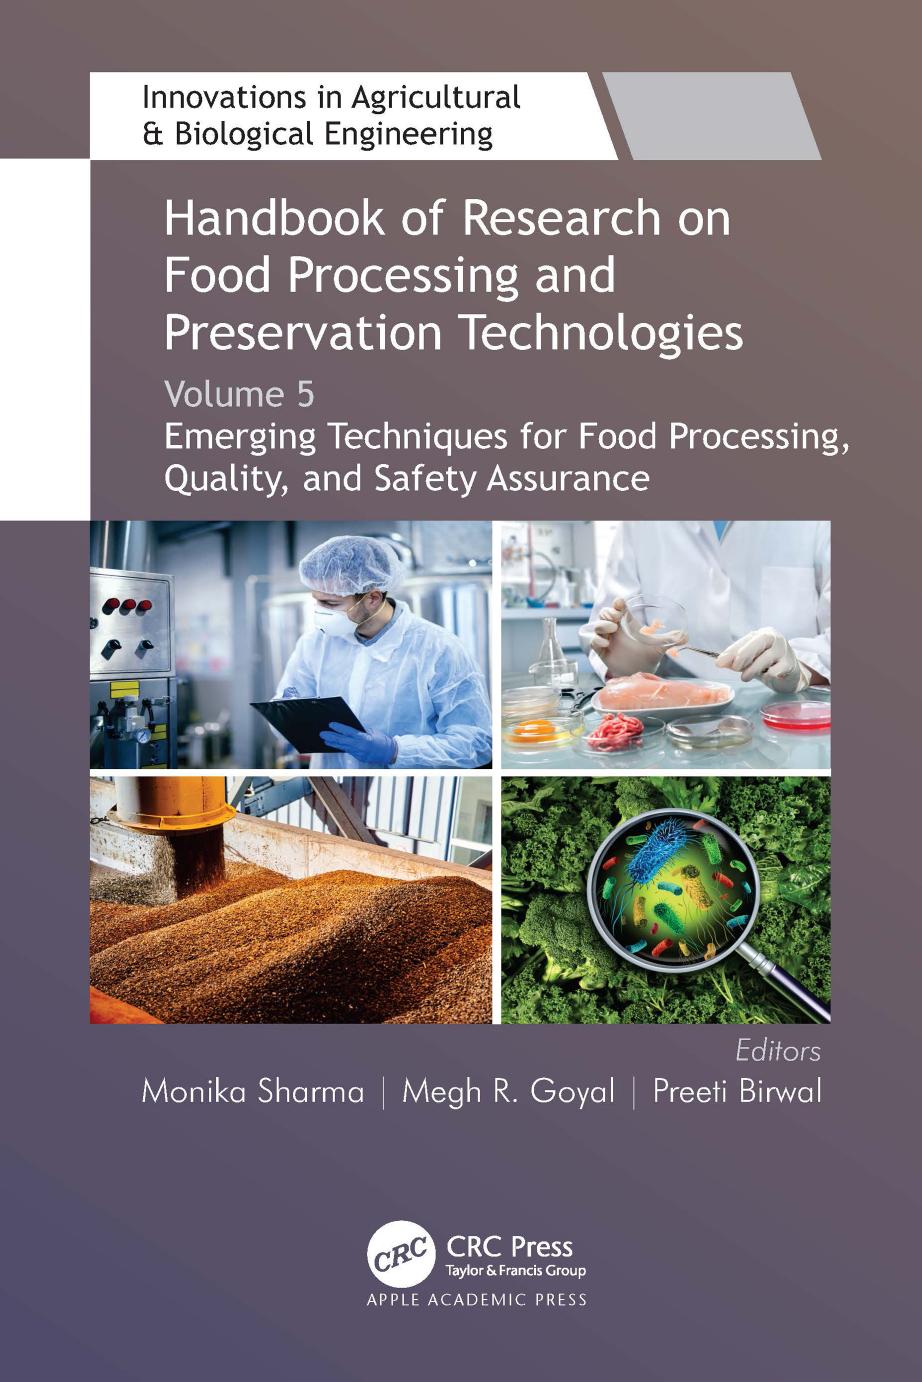 Handbook of Research on Food Processing and Preservation Technologies, Volume 5: Emerging Techniques for Food Processing, Quality, and Safety Assurance